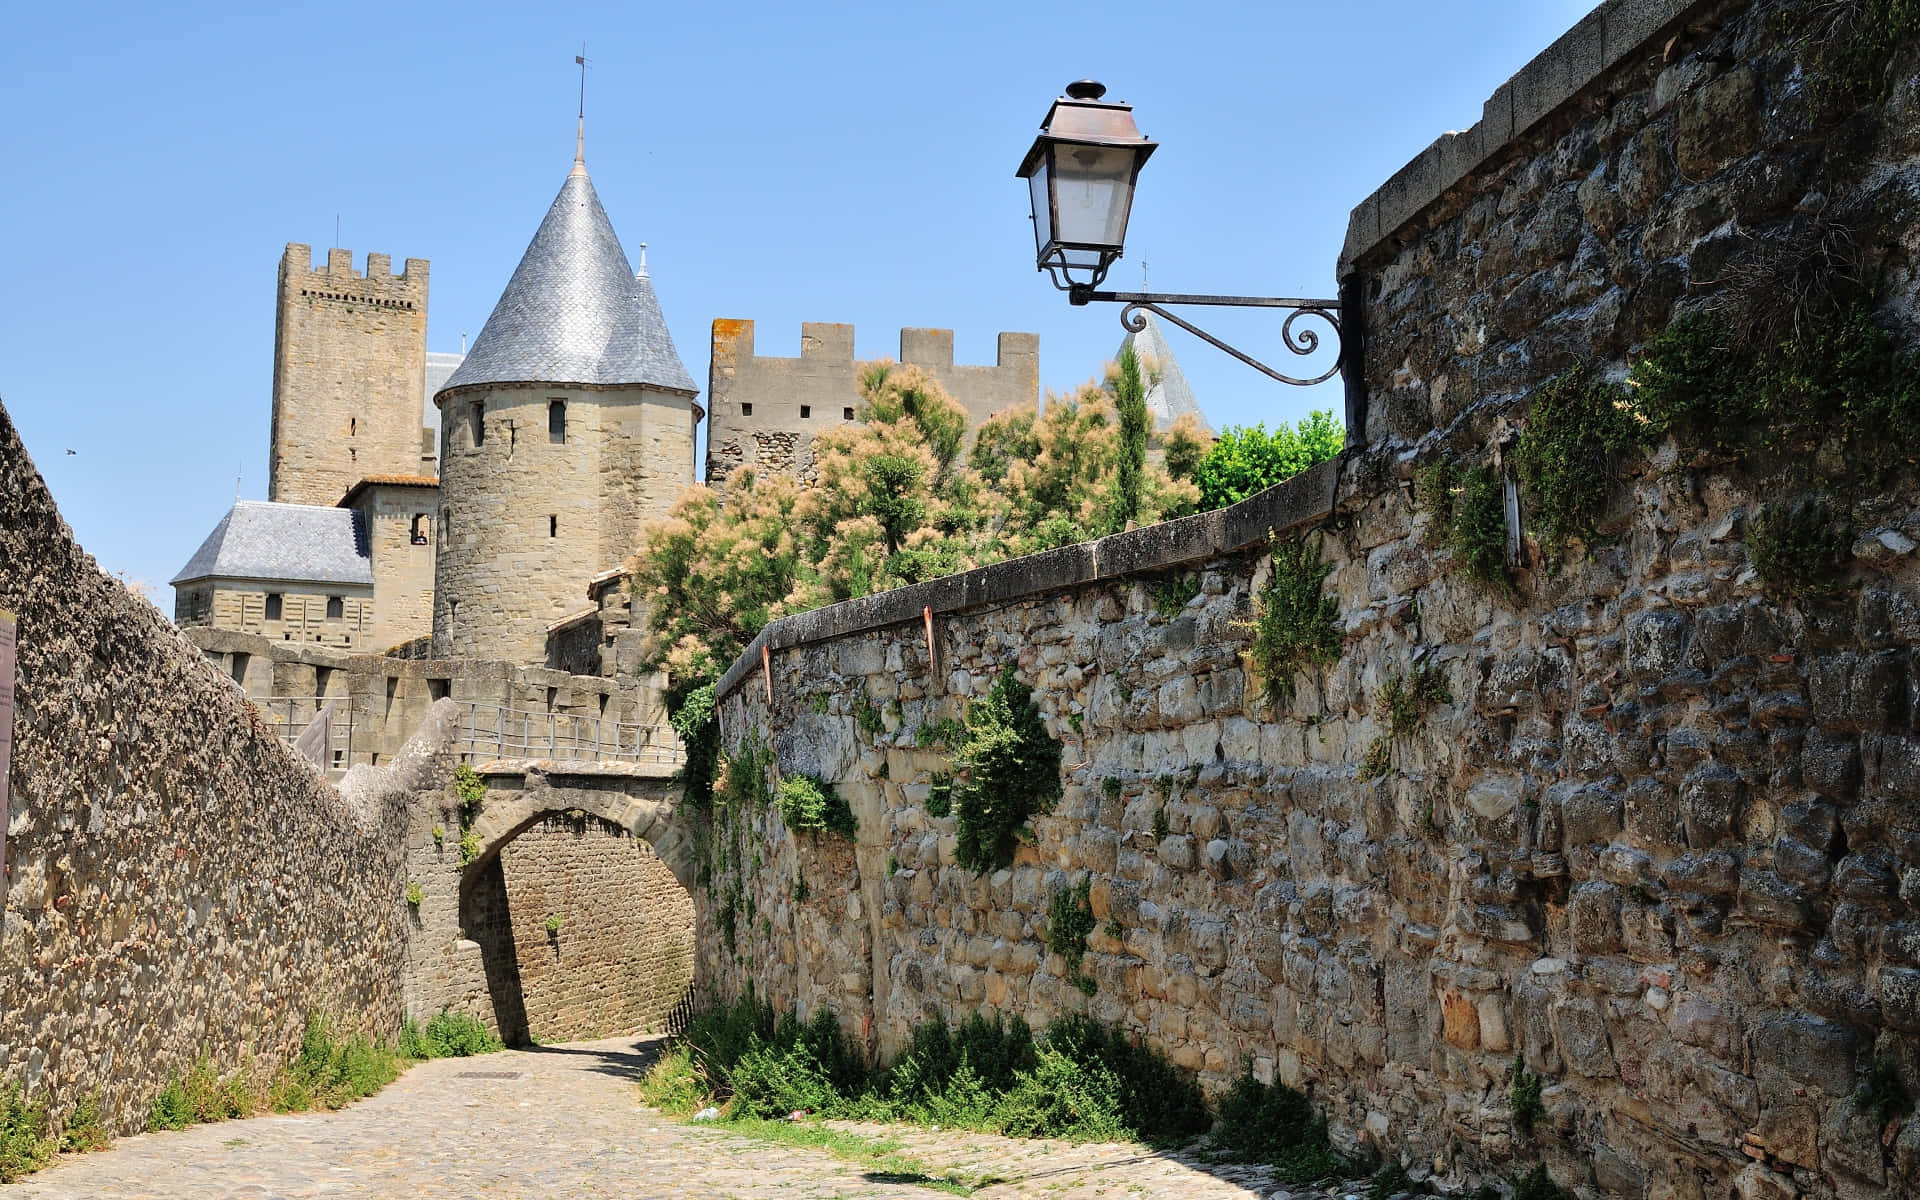 Arched Street In The Cite De Carcassonne Picture